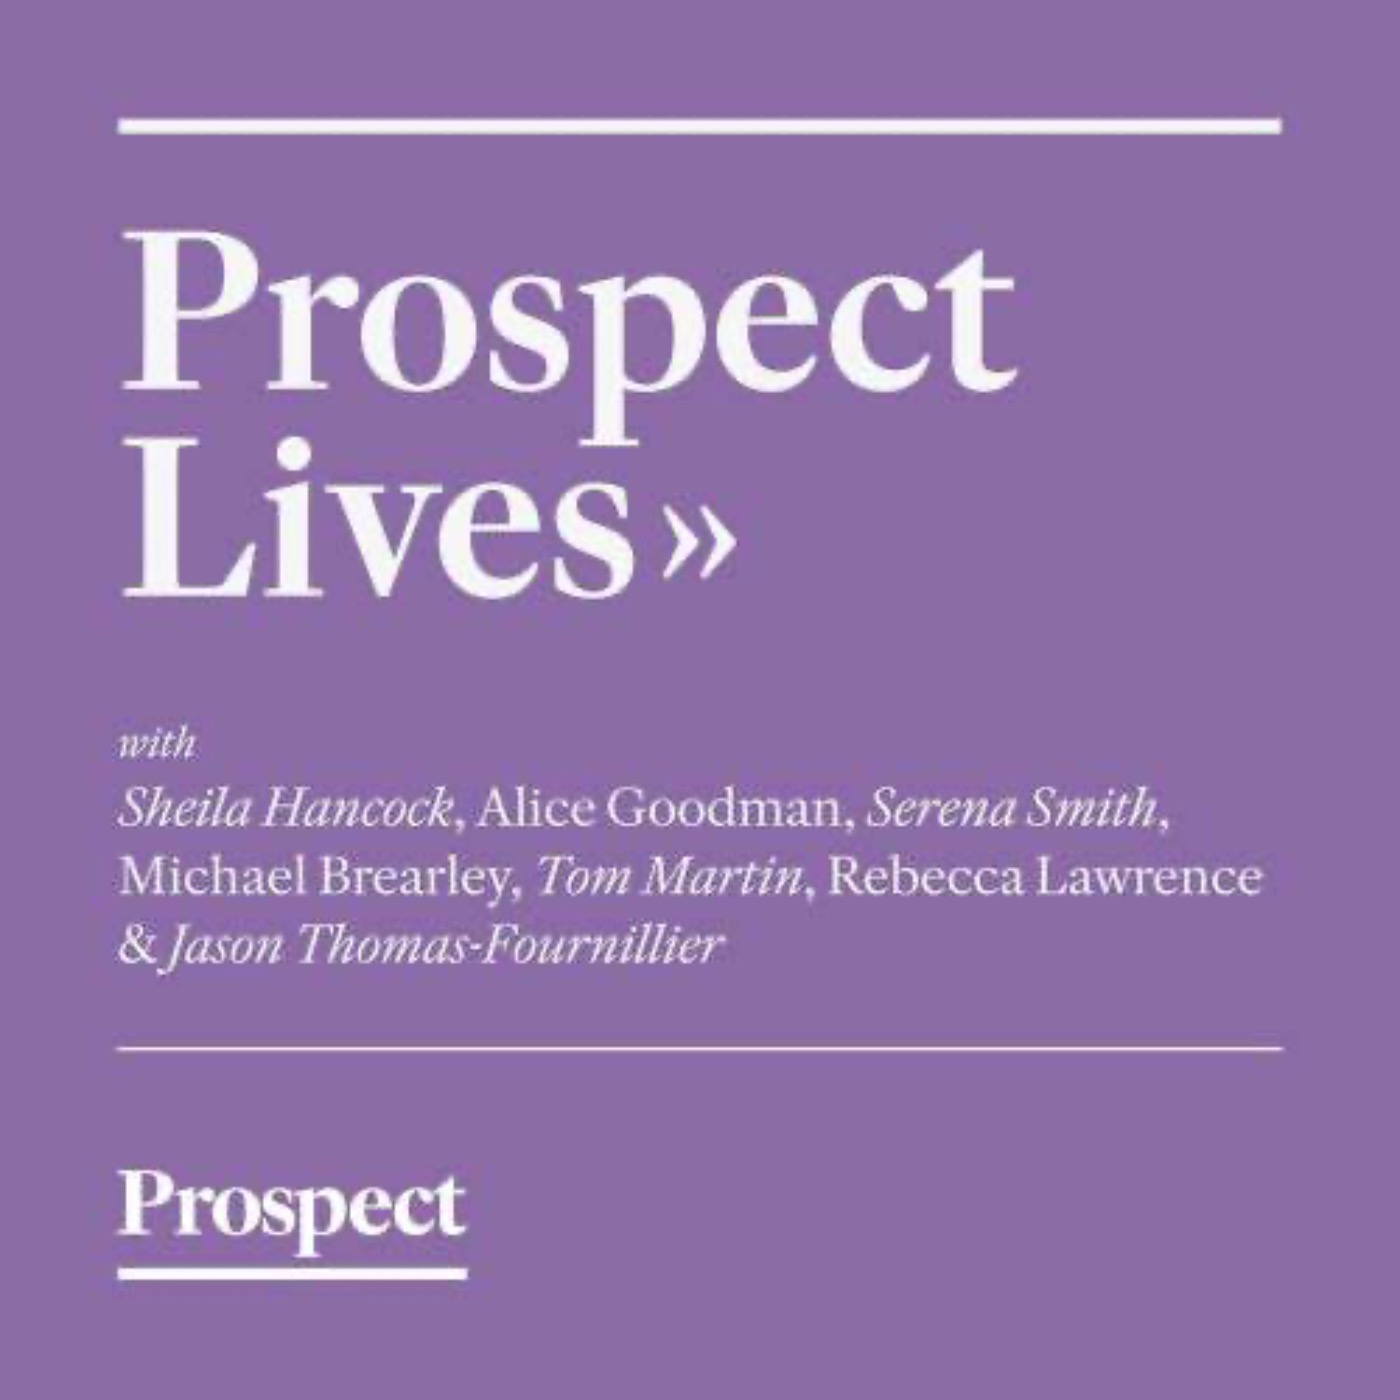 Prospect Lives: Decisions, challenges and fresh starts